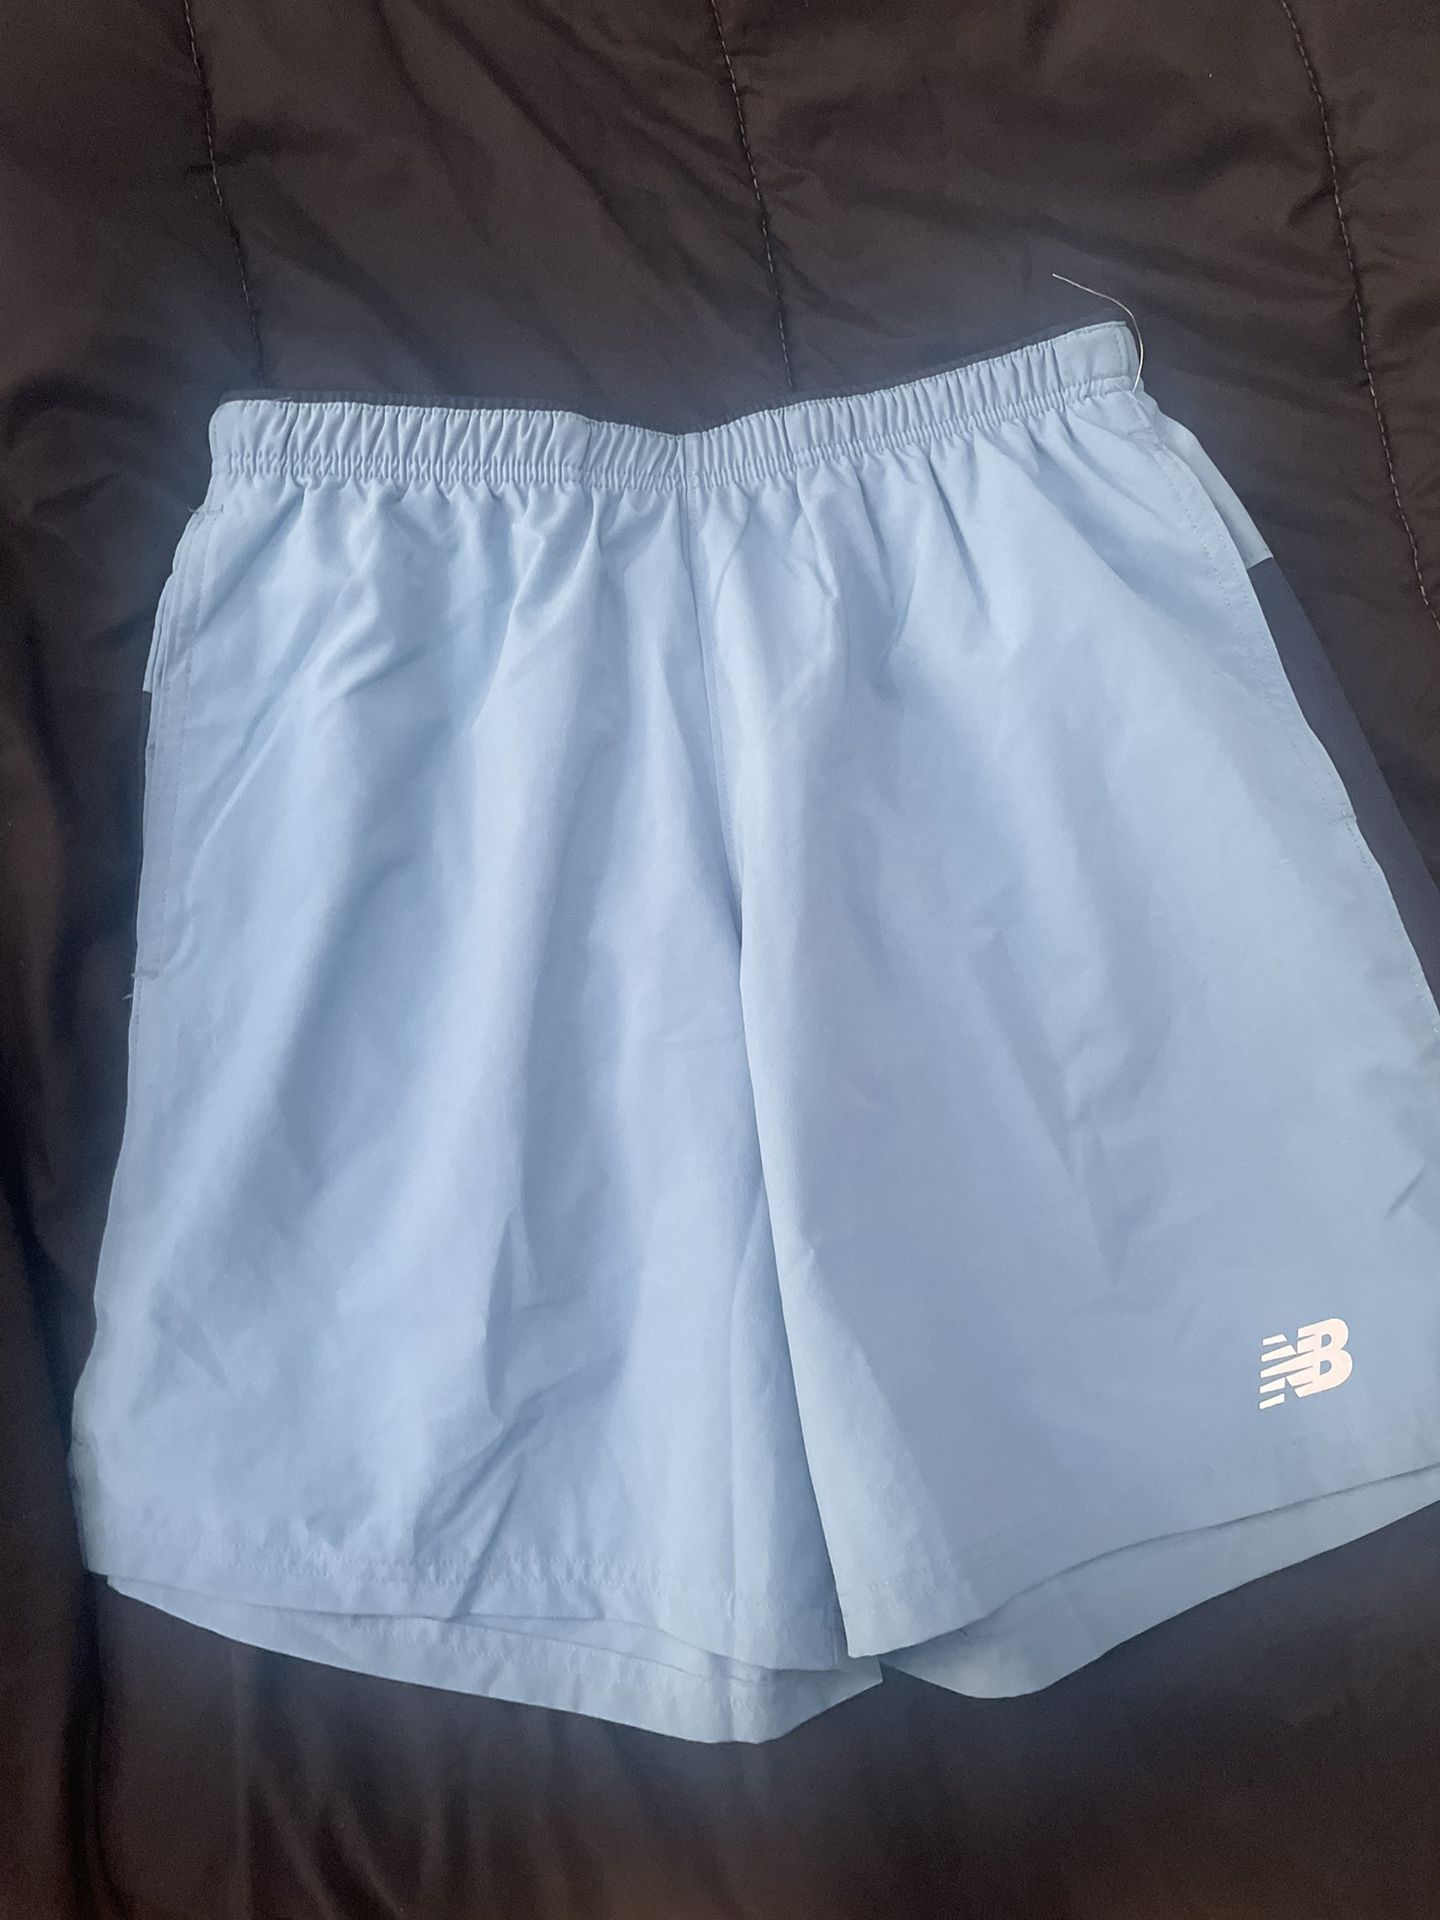 new balance shorts for Sale in Philadelphia, PA - OfferUp